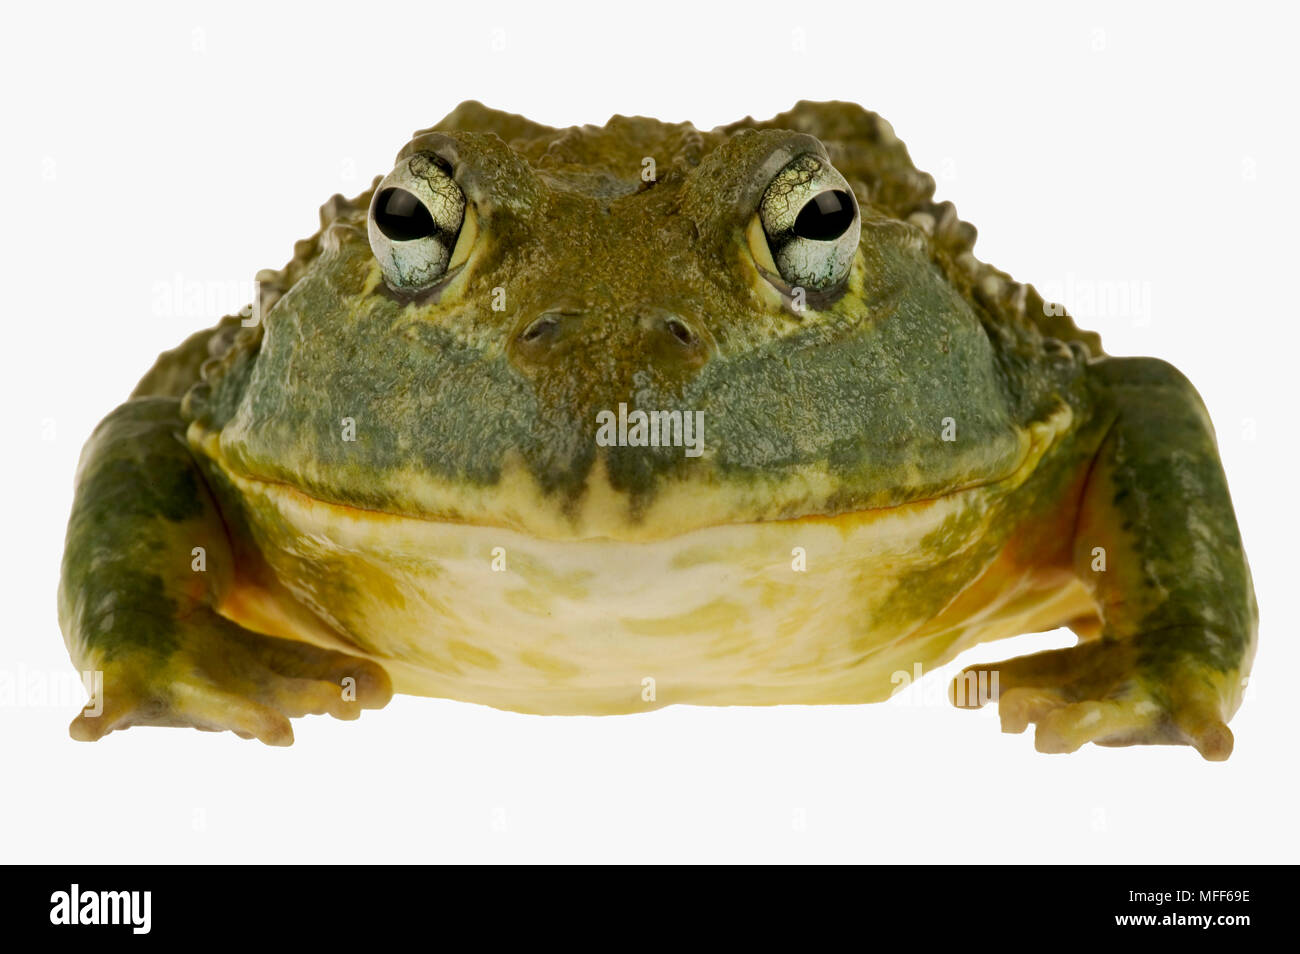 GIANT BULLFROG Pyxicephalus adspersus Males can be over 250mm in body length  and weigh over 1kg. South Africa Stock Photo